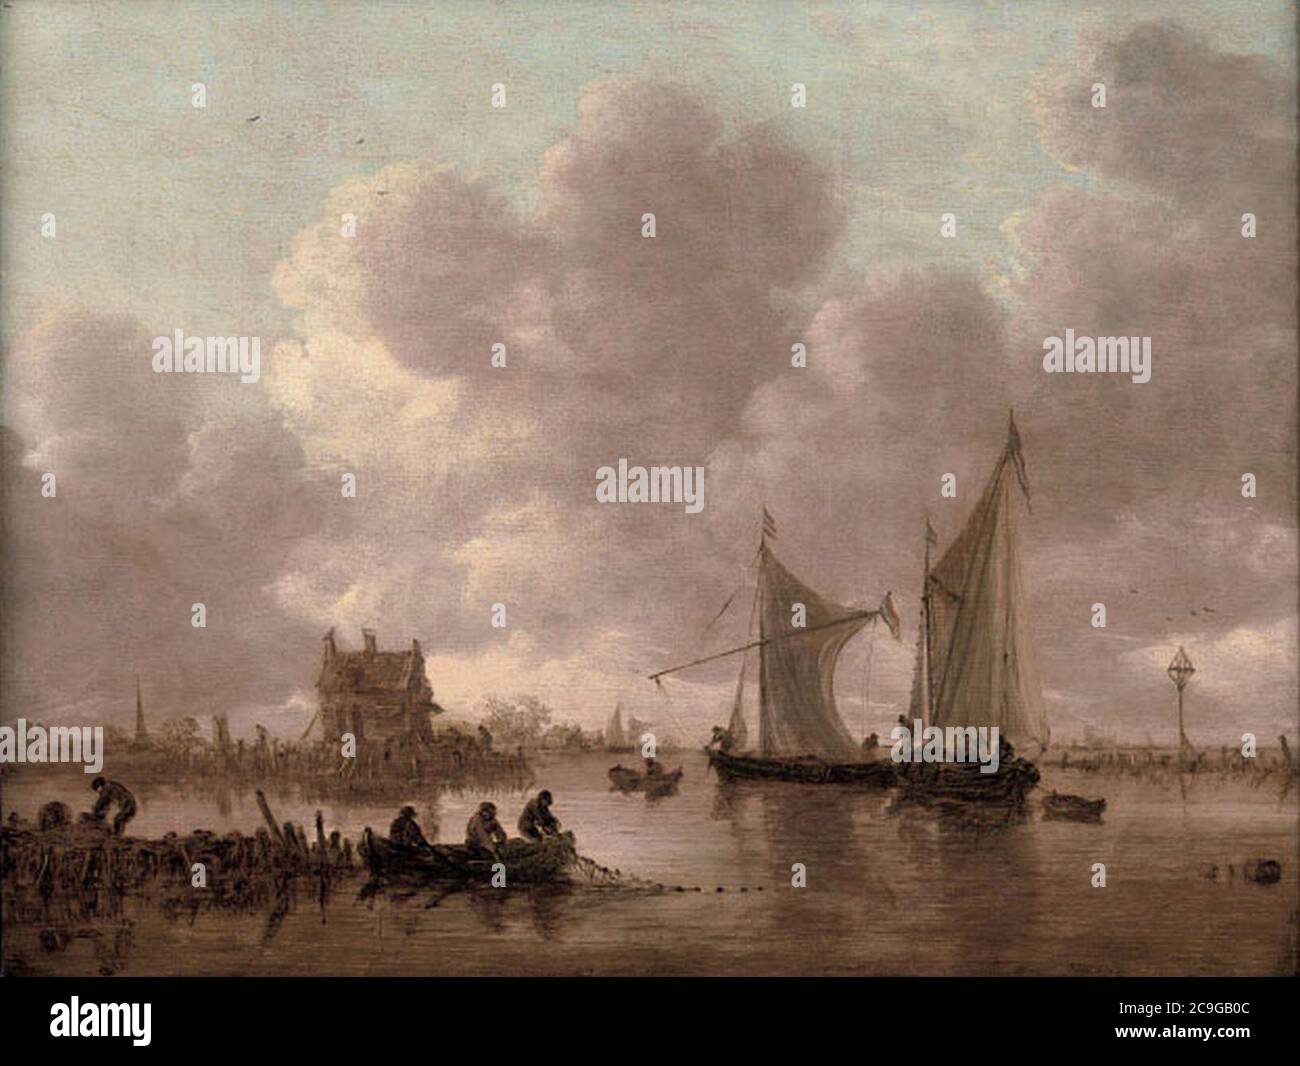 Jan van Goyen - View of Dordtse Kil with Shipping and Old Toll House 2010 AMS 02849 0030 000. Stock Photo